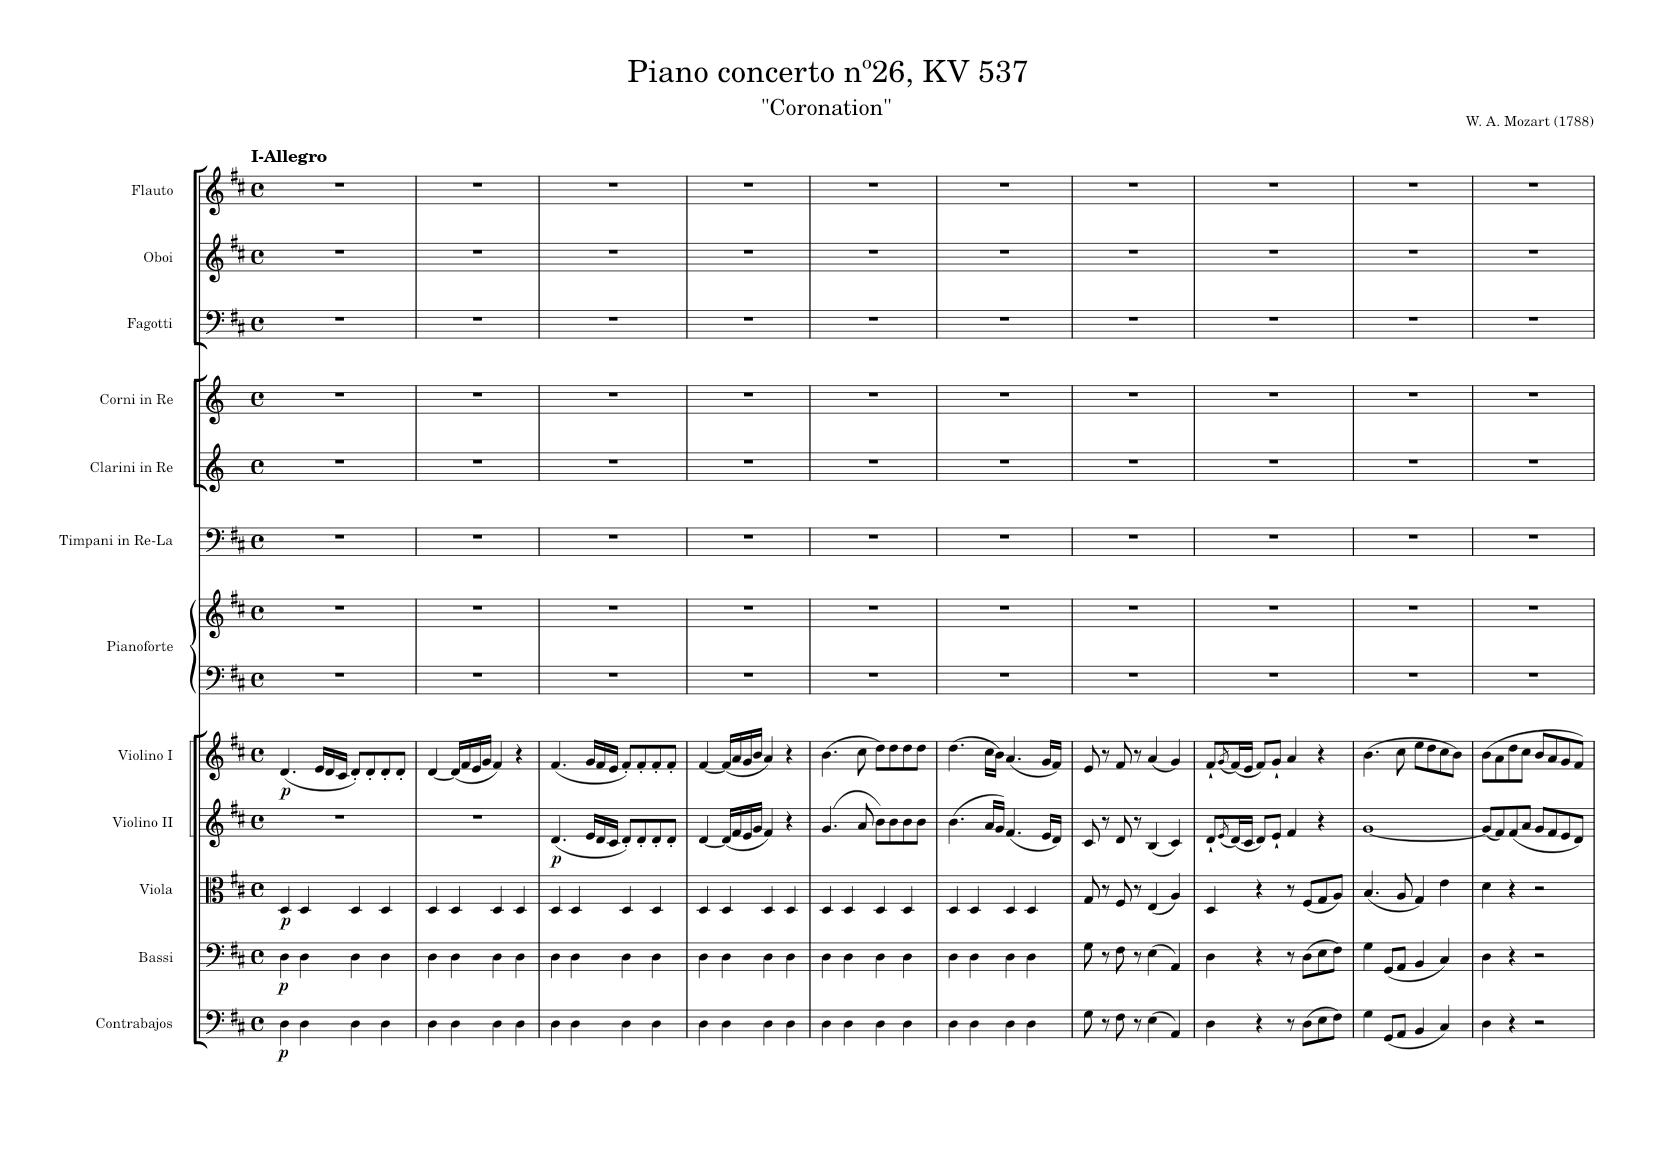 Mozart--Piano Concerto nº 26 (Krönungskonzert) Sheet music for Piano,  Flute, Oboe, Bassoon & more instruments (Chamber Orchestra) | Musescore.com